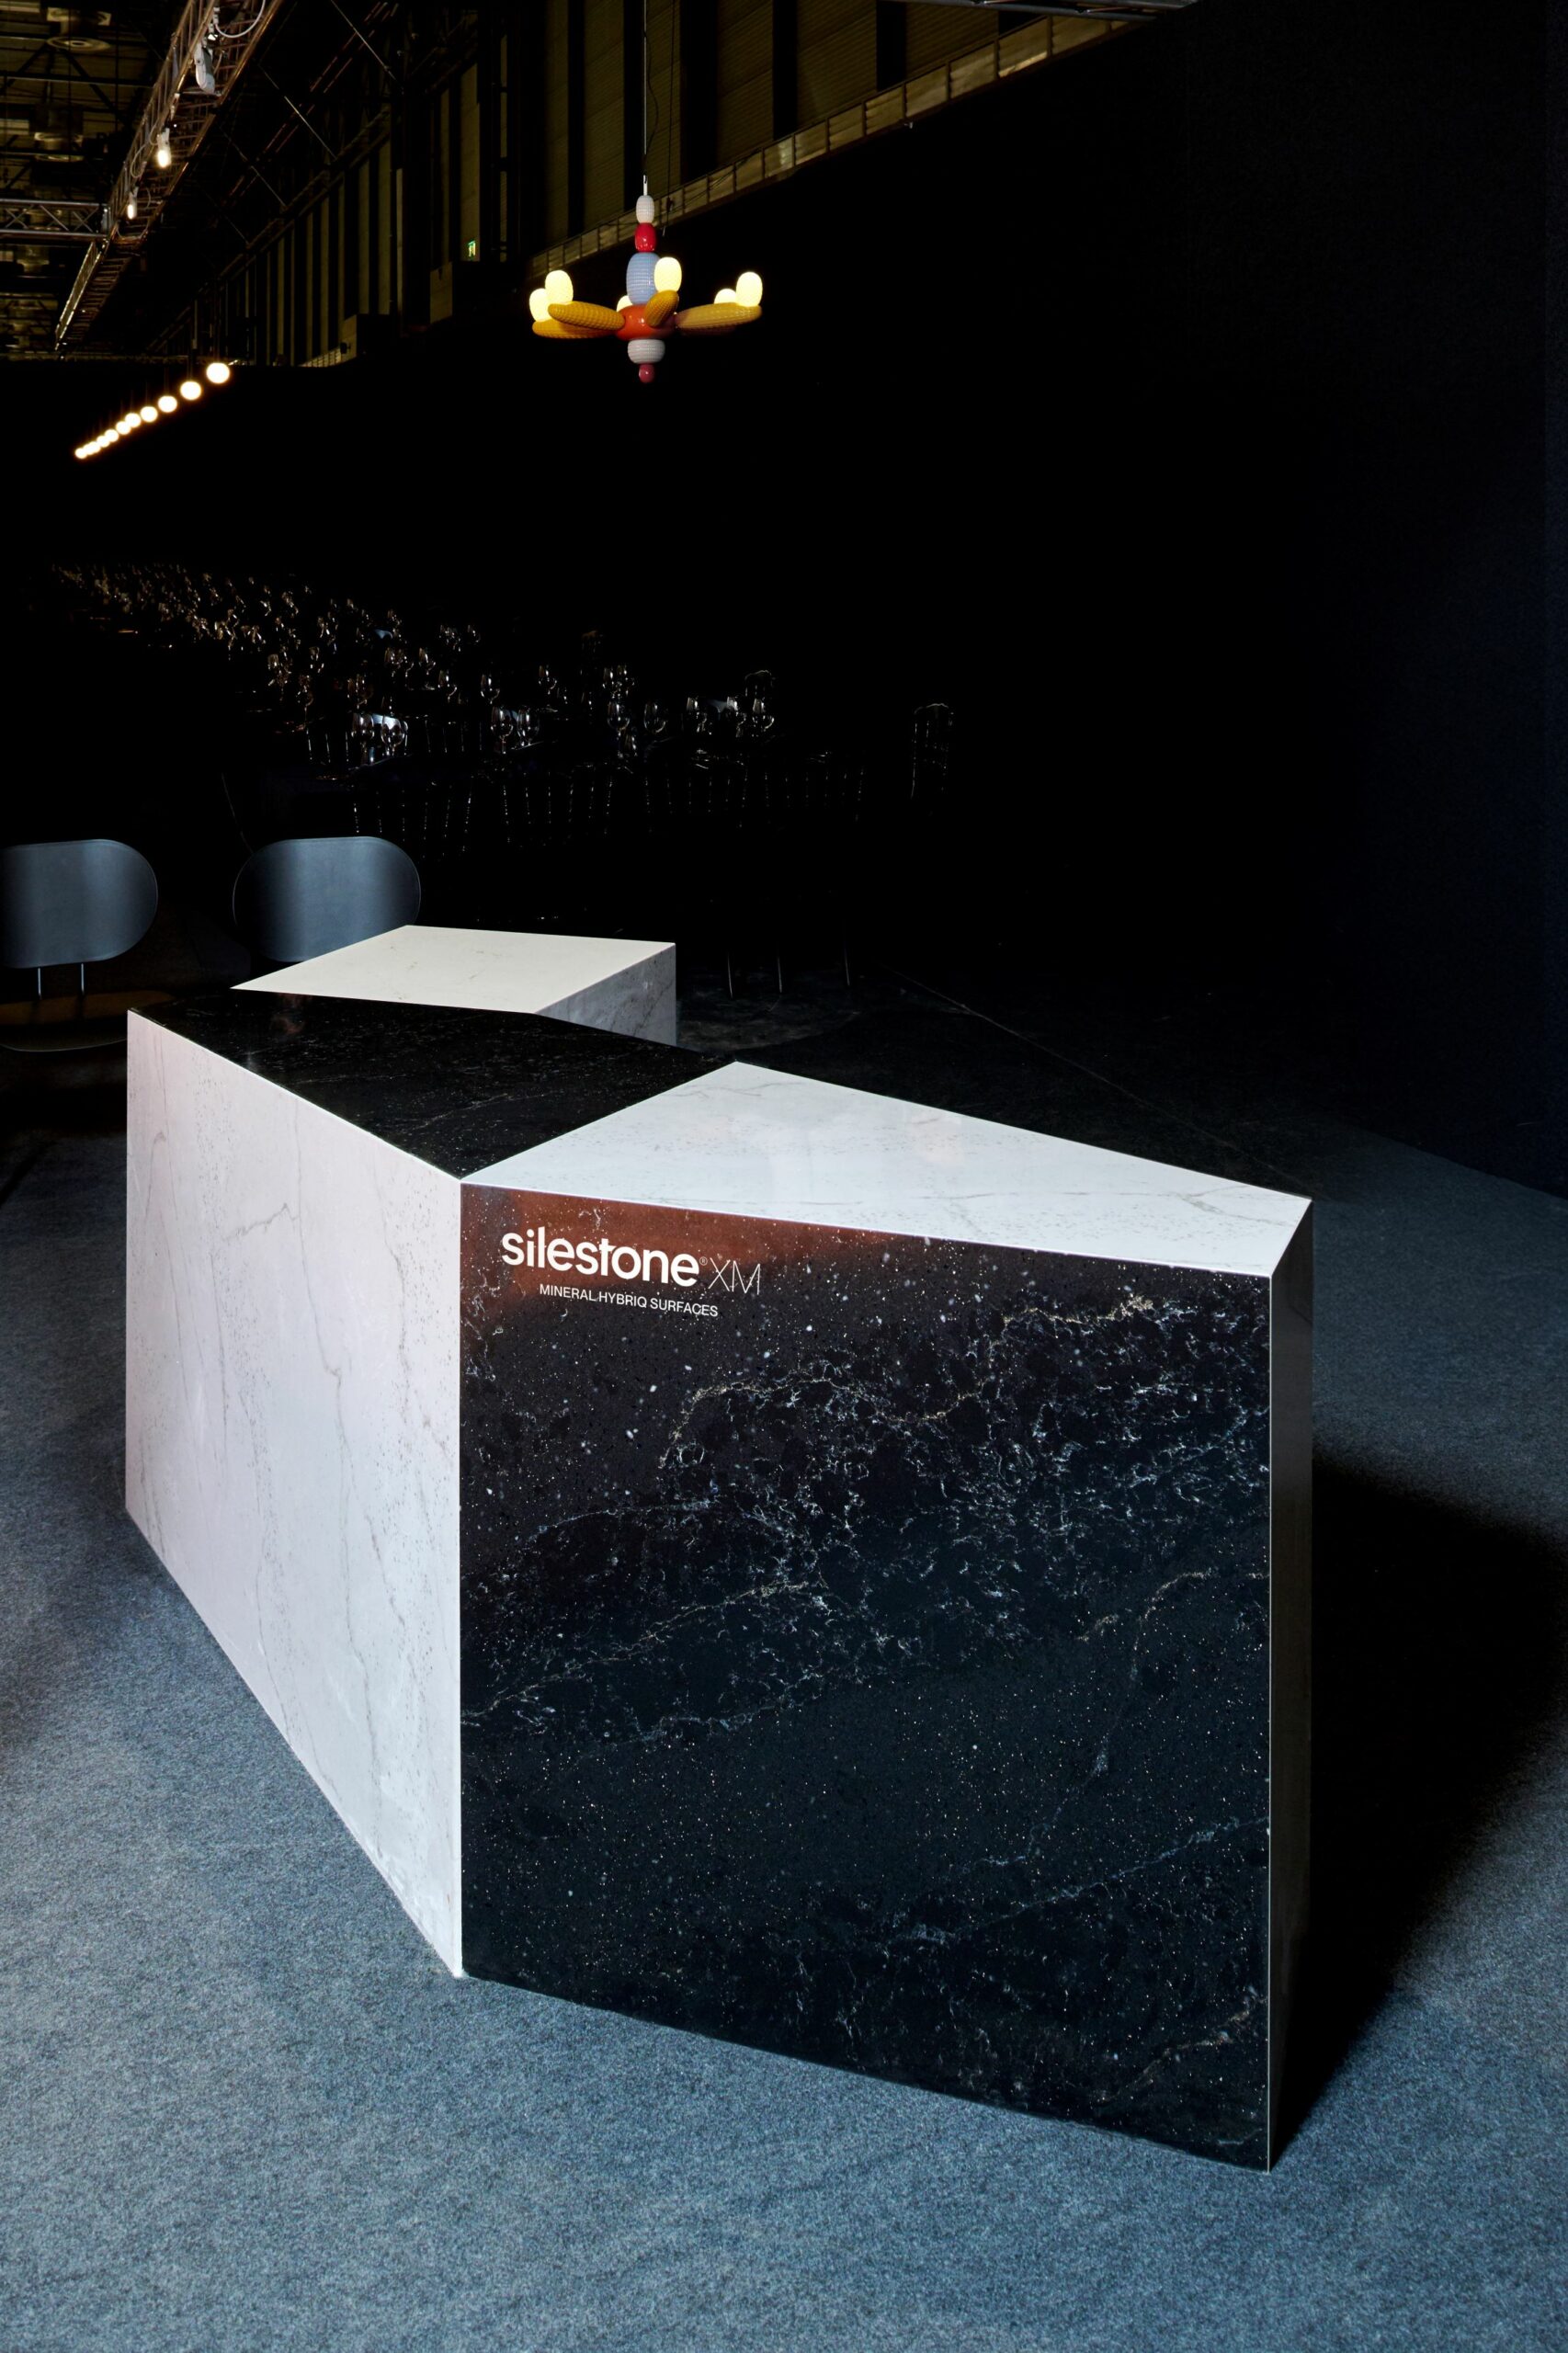 Image of cosentino arco 002 LGC 5349 1 scaled in ARCOmadrid 2024 brings out Silestone’s most artistic side - Cosentino